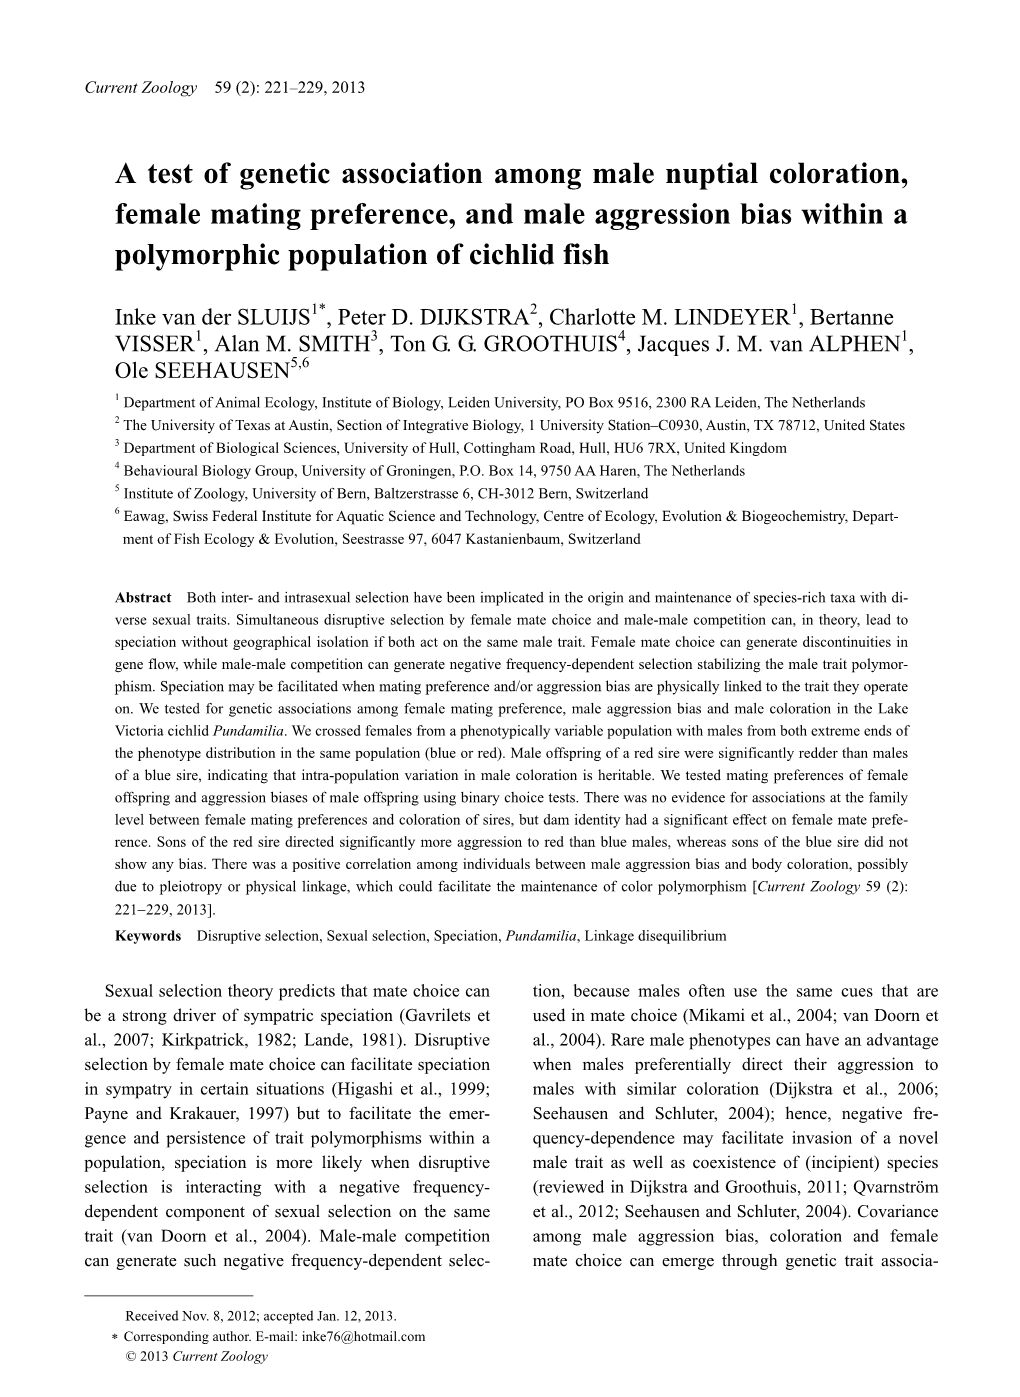 A Test of Genetic Association Among Male Nuptial Coloration, Female Mating Preference, and Male Aggression Bias Within a Polymorphic Population of Cichlid Fish